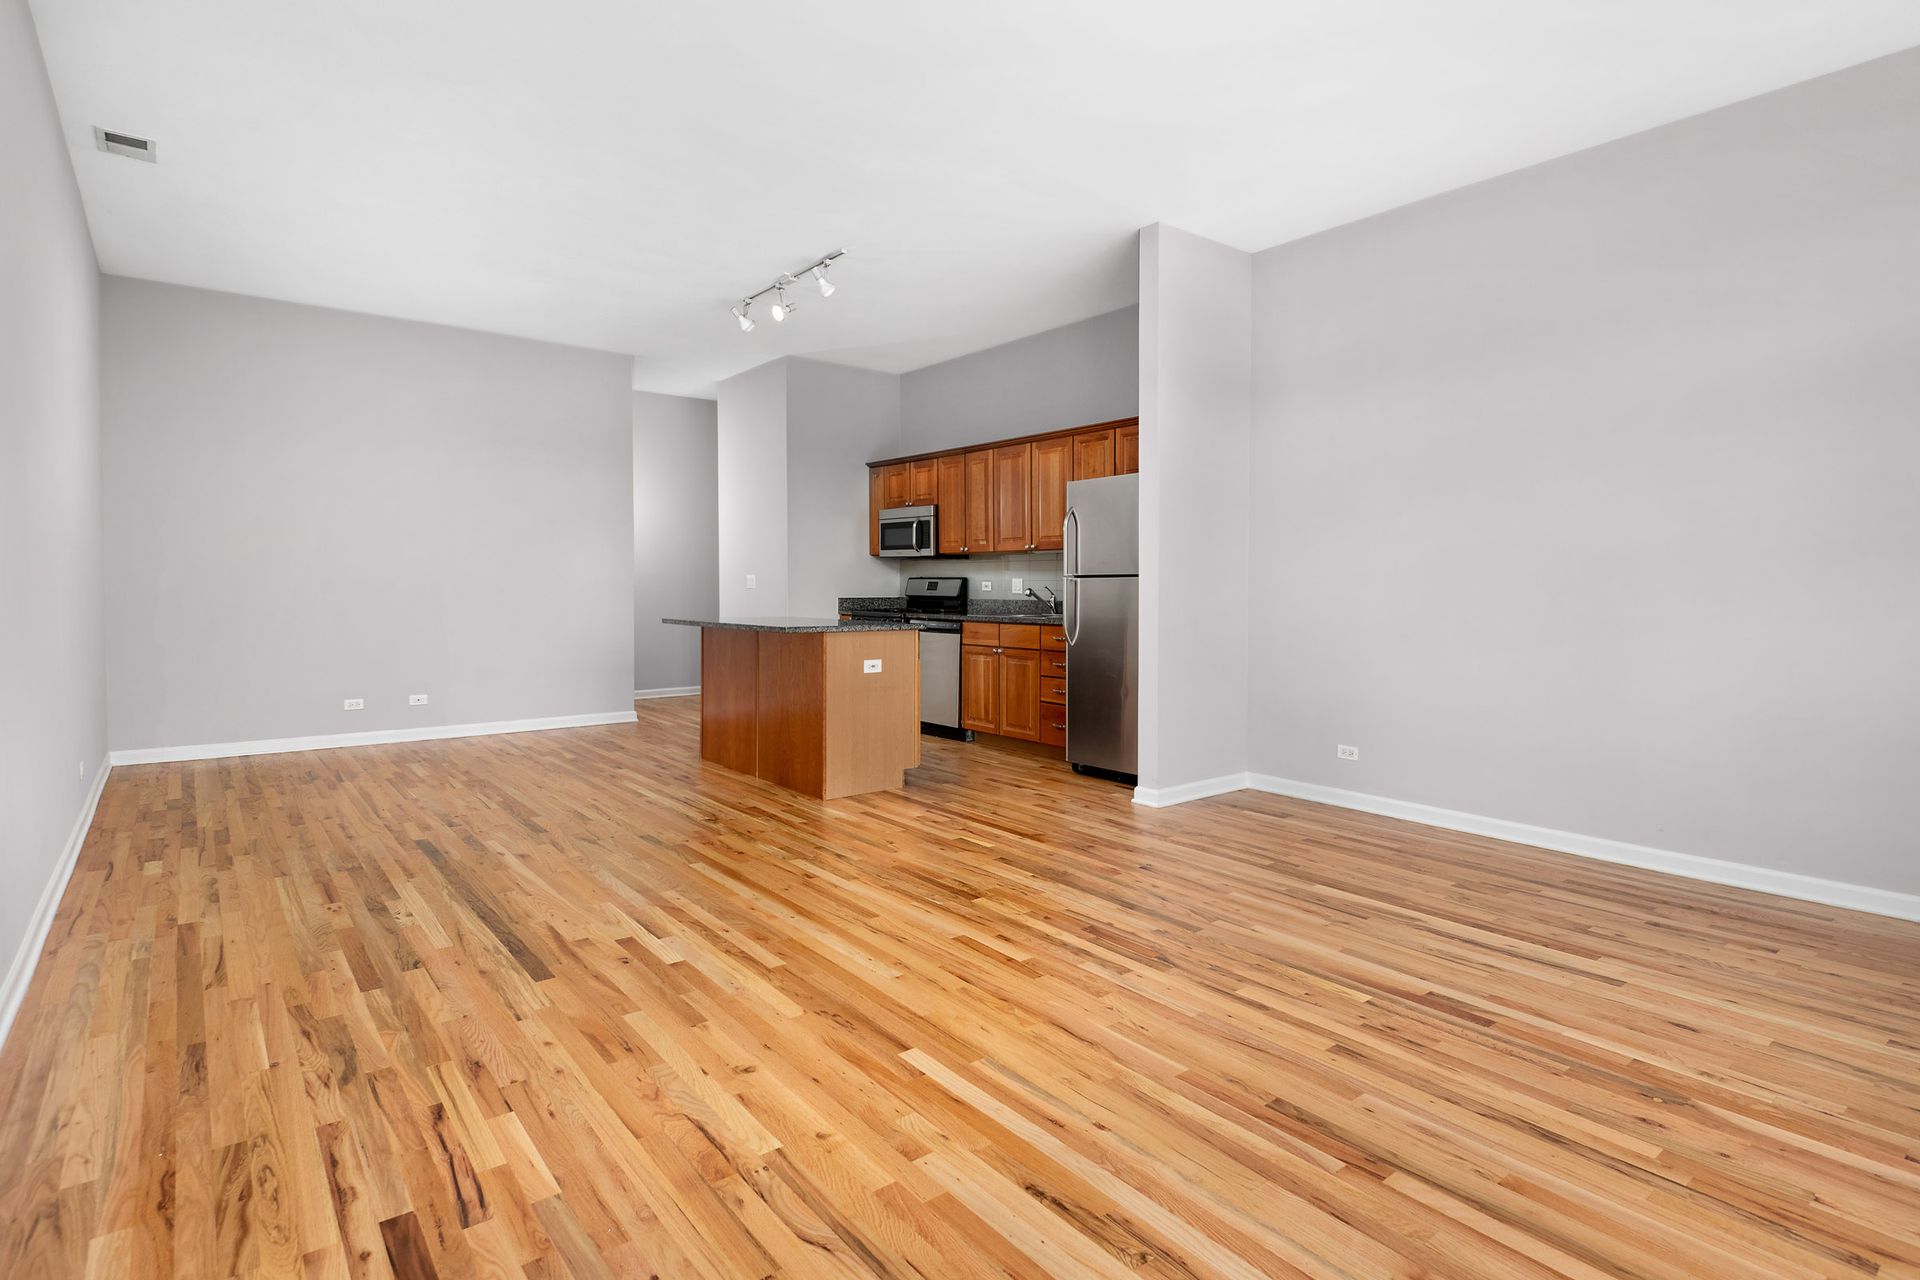 A living room with hardwood floors and a kitchen in the background at 2010 West Pierce Avenue.